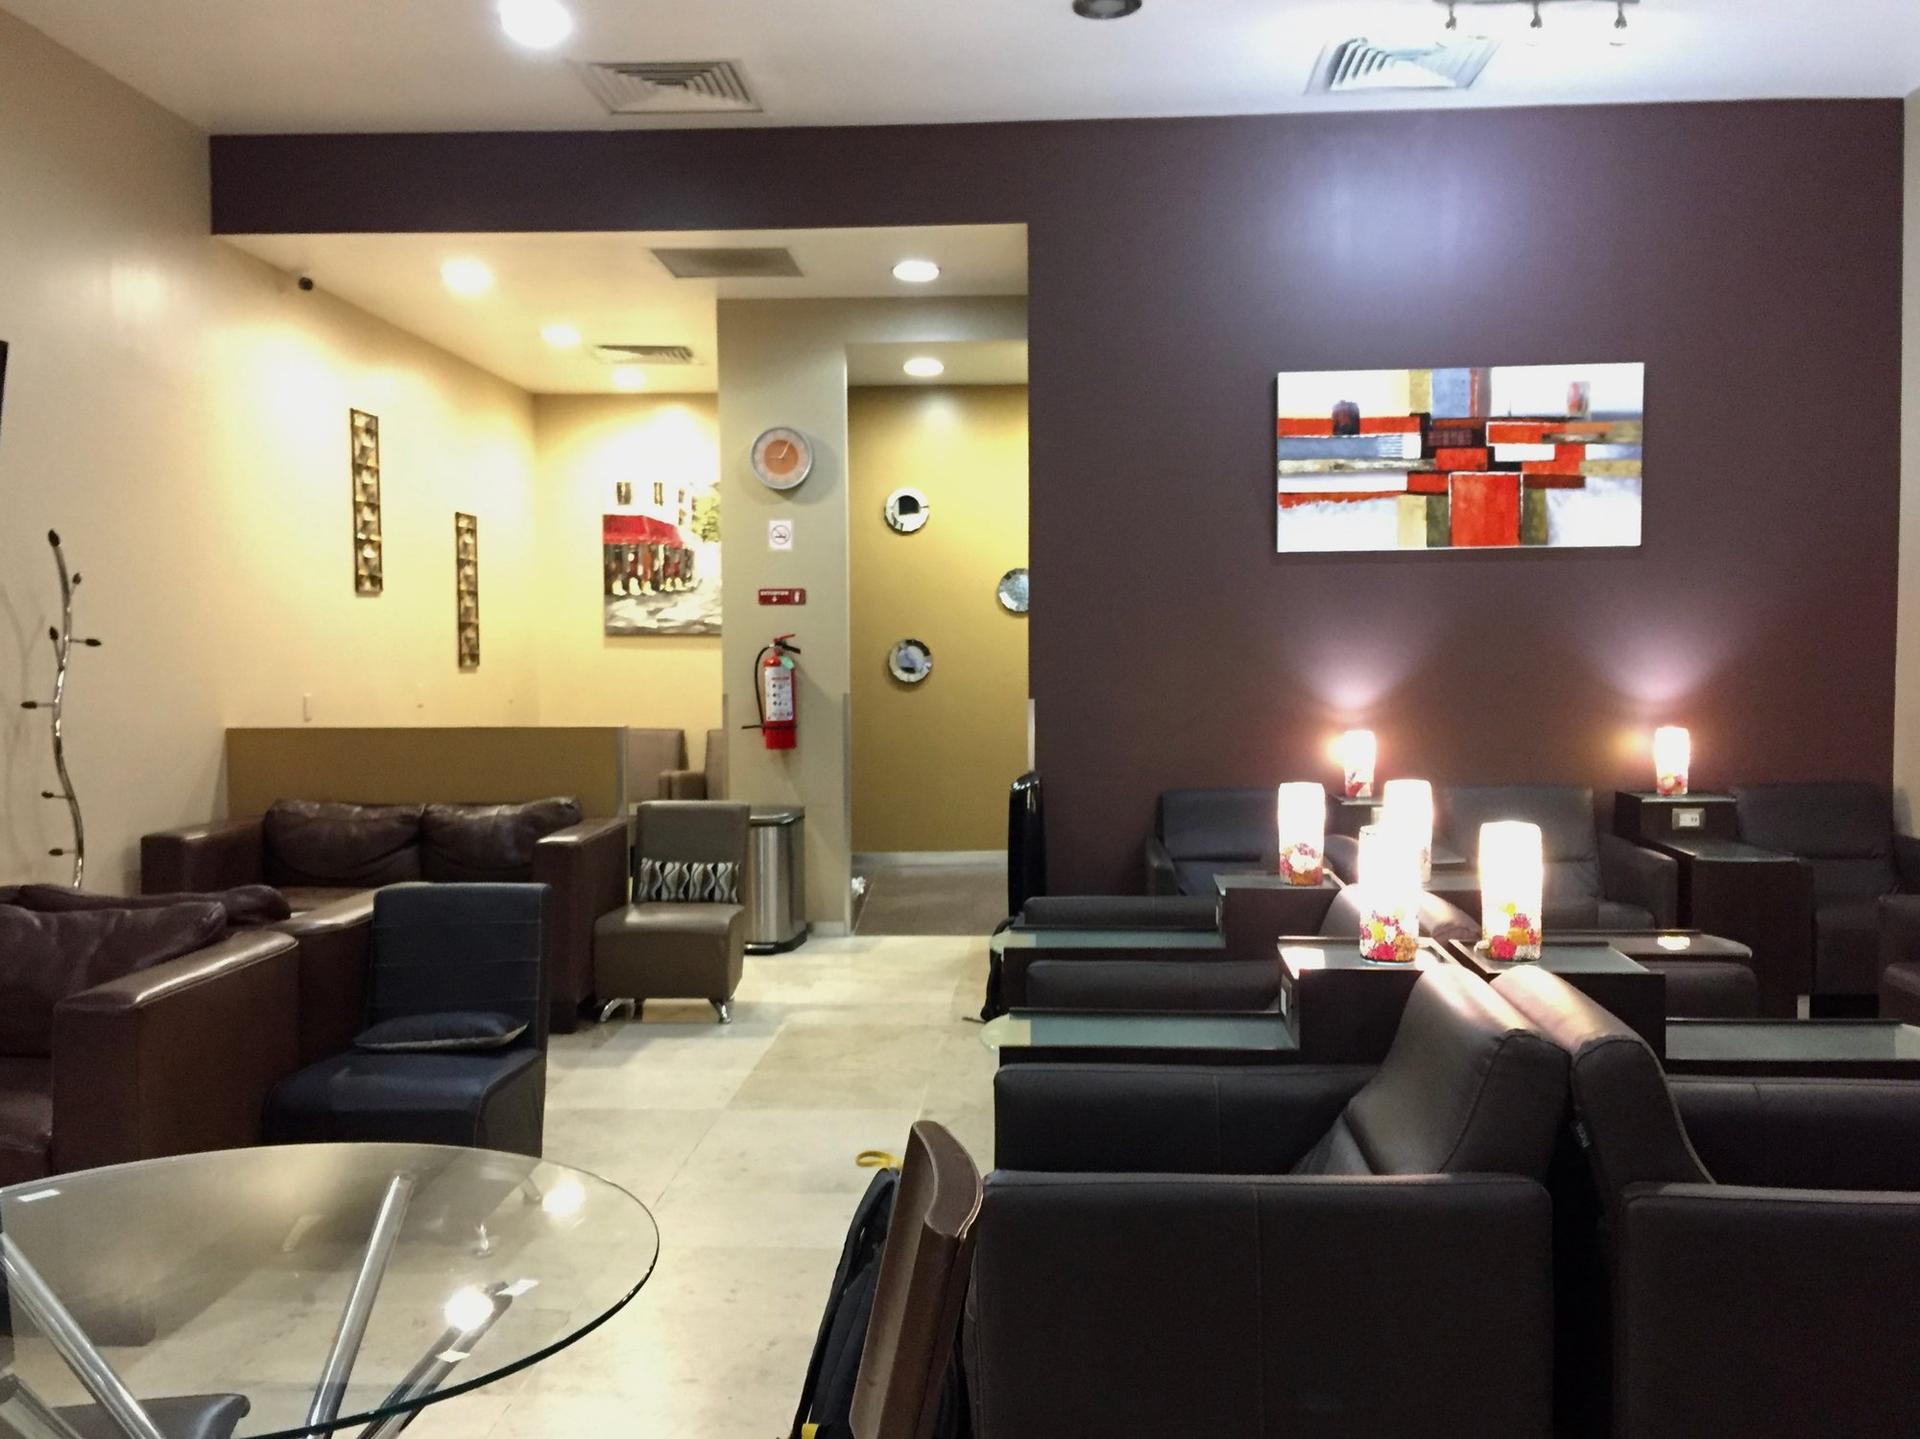 Caral VIP Lounge image 2 of 10